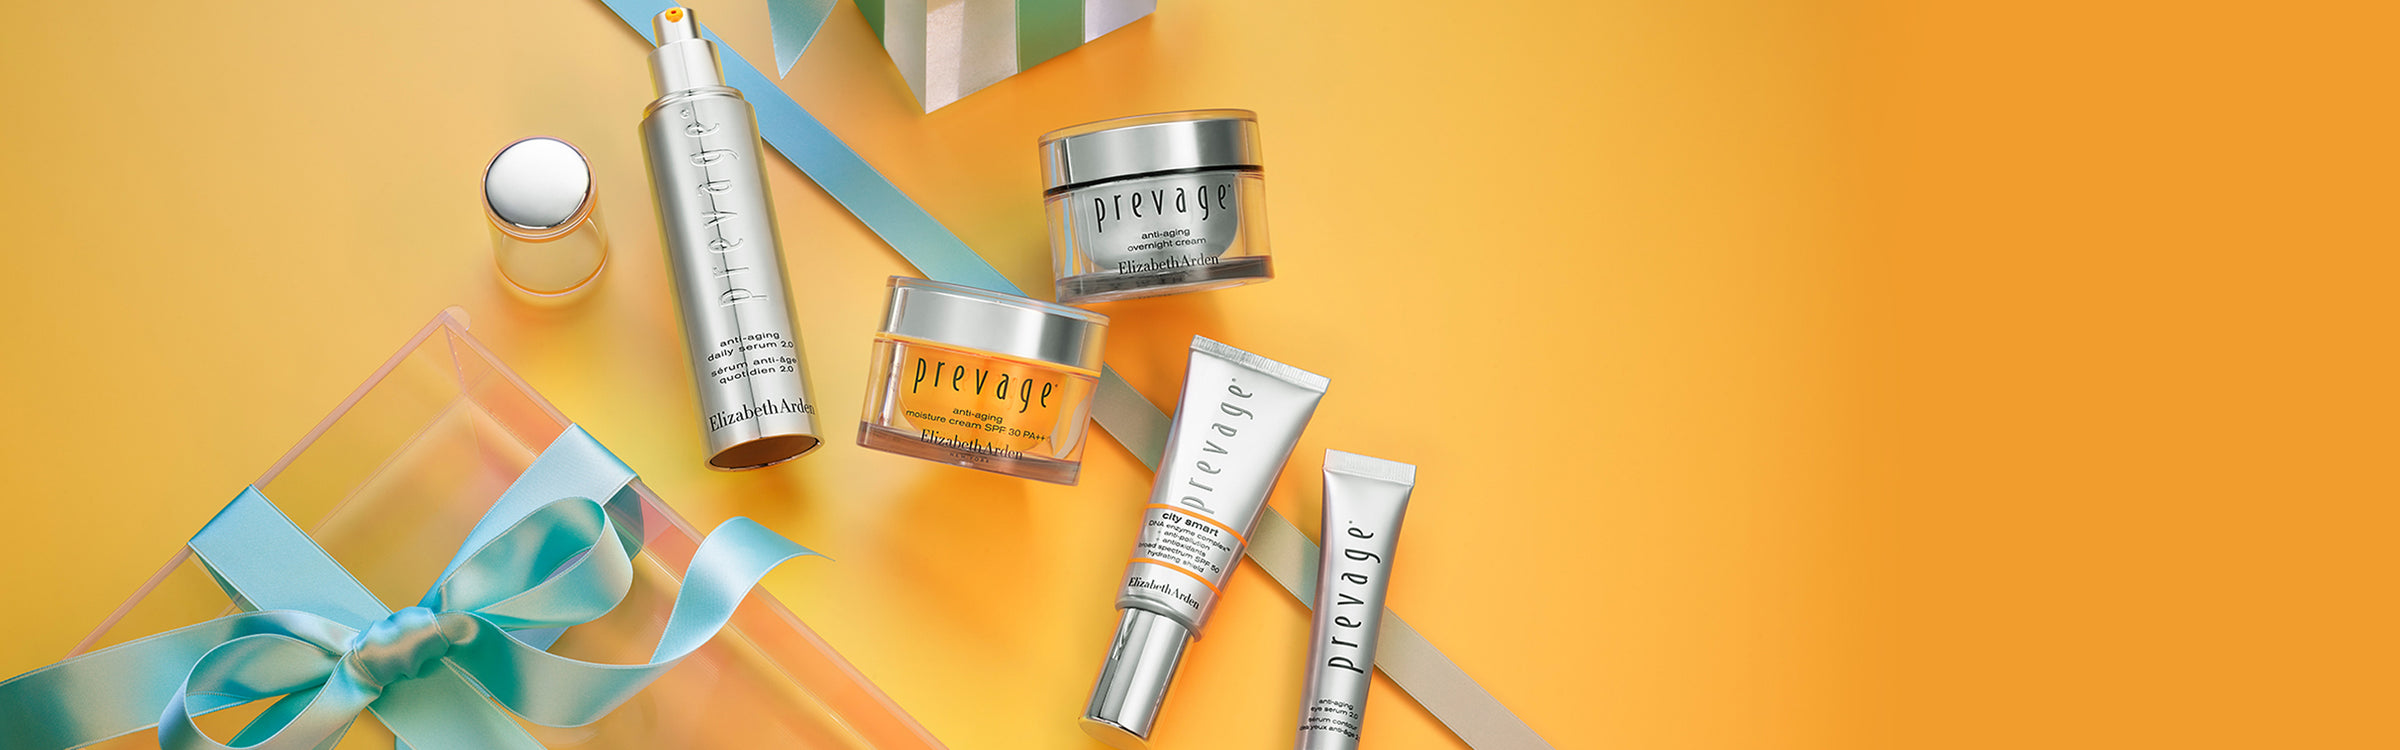 Prevage Banner